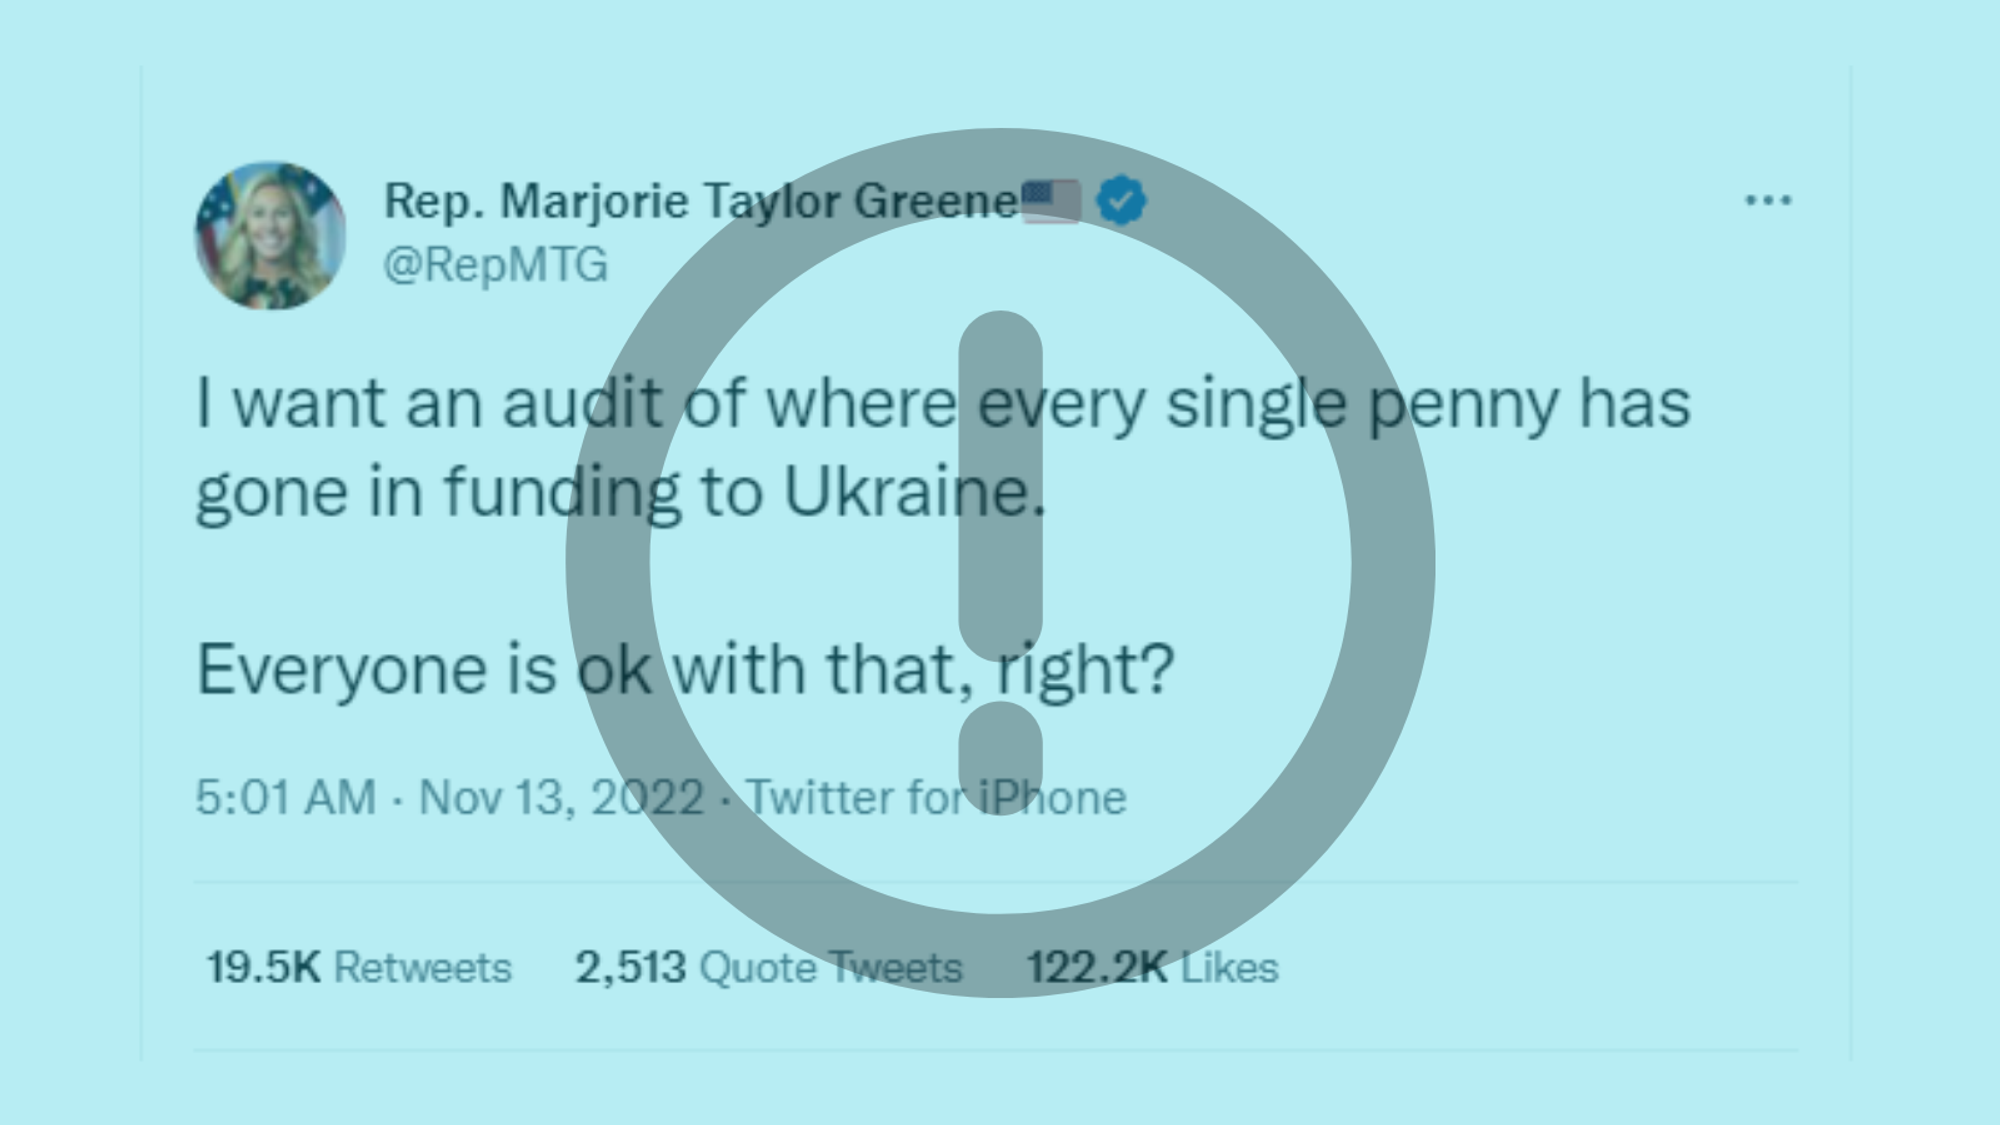 Claims the US isn’t auditing aid to Ukraine are pants-on-fire false